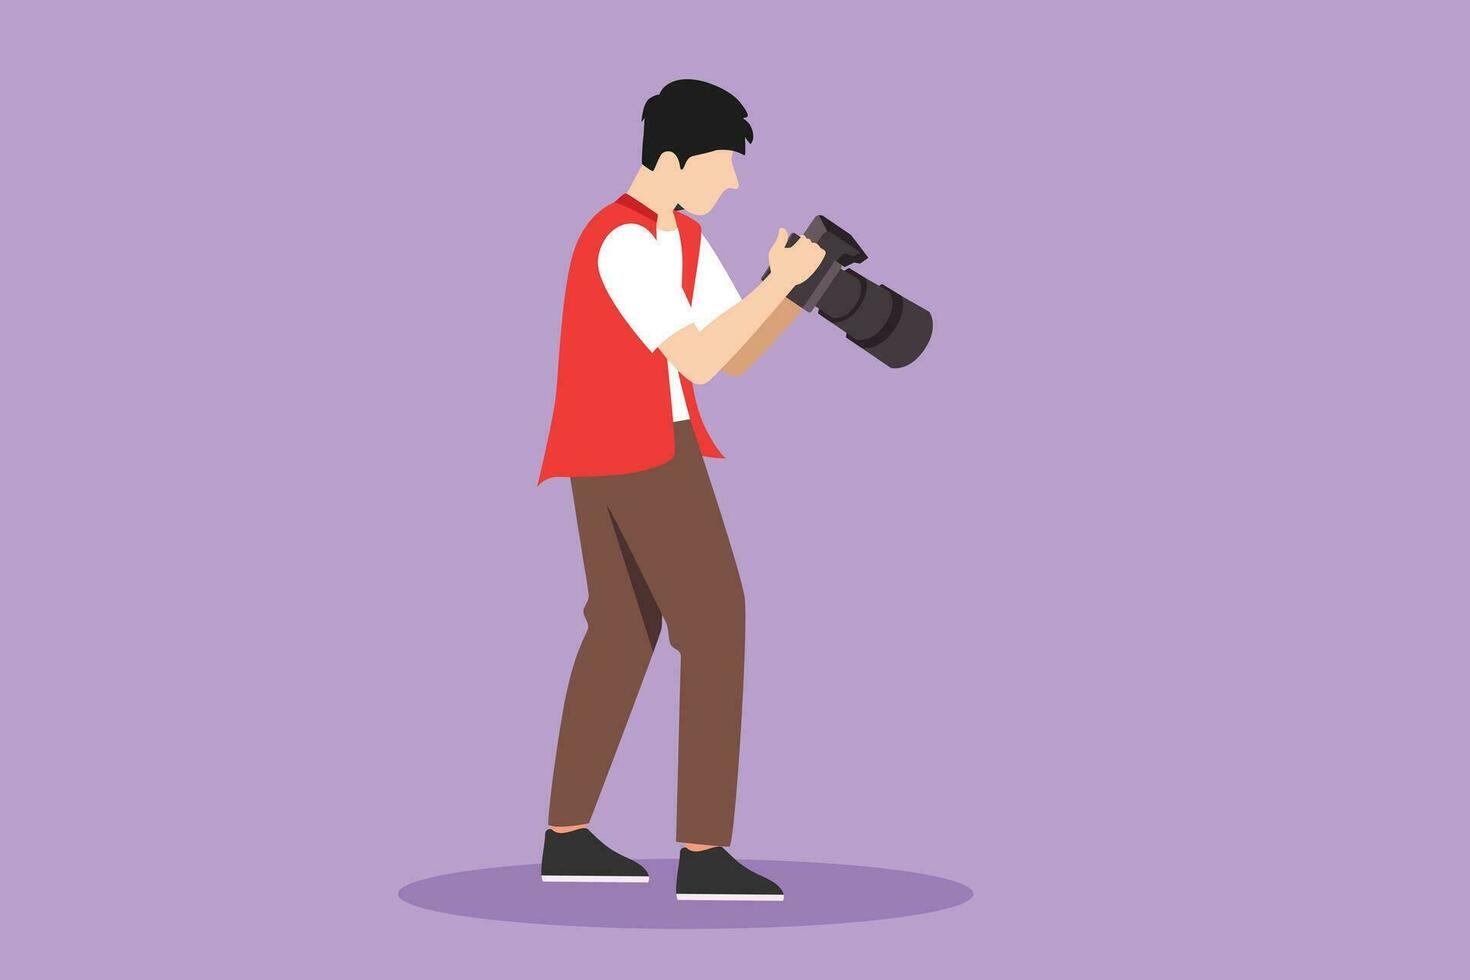 Character flat drawing stylized photographers or paparazzi taking photo with digital cameras with angles. Journalists or reporters checking pictures after shooting. Cartoon design vector illustration